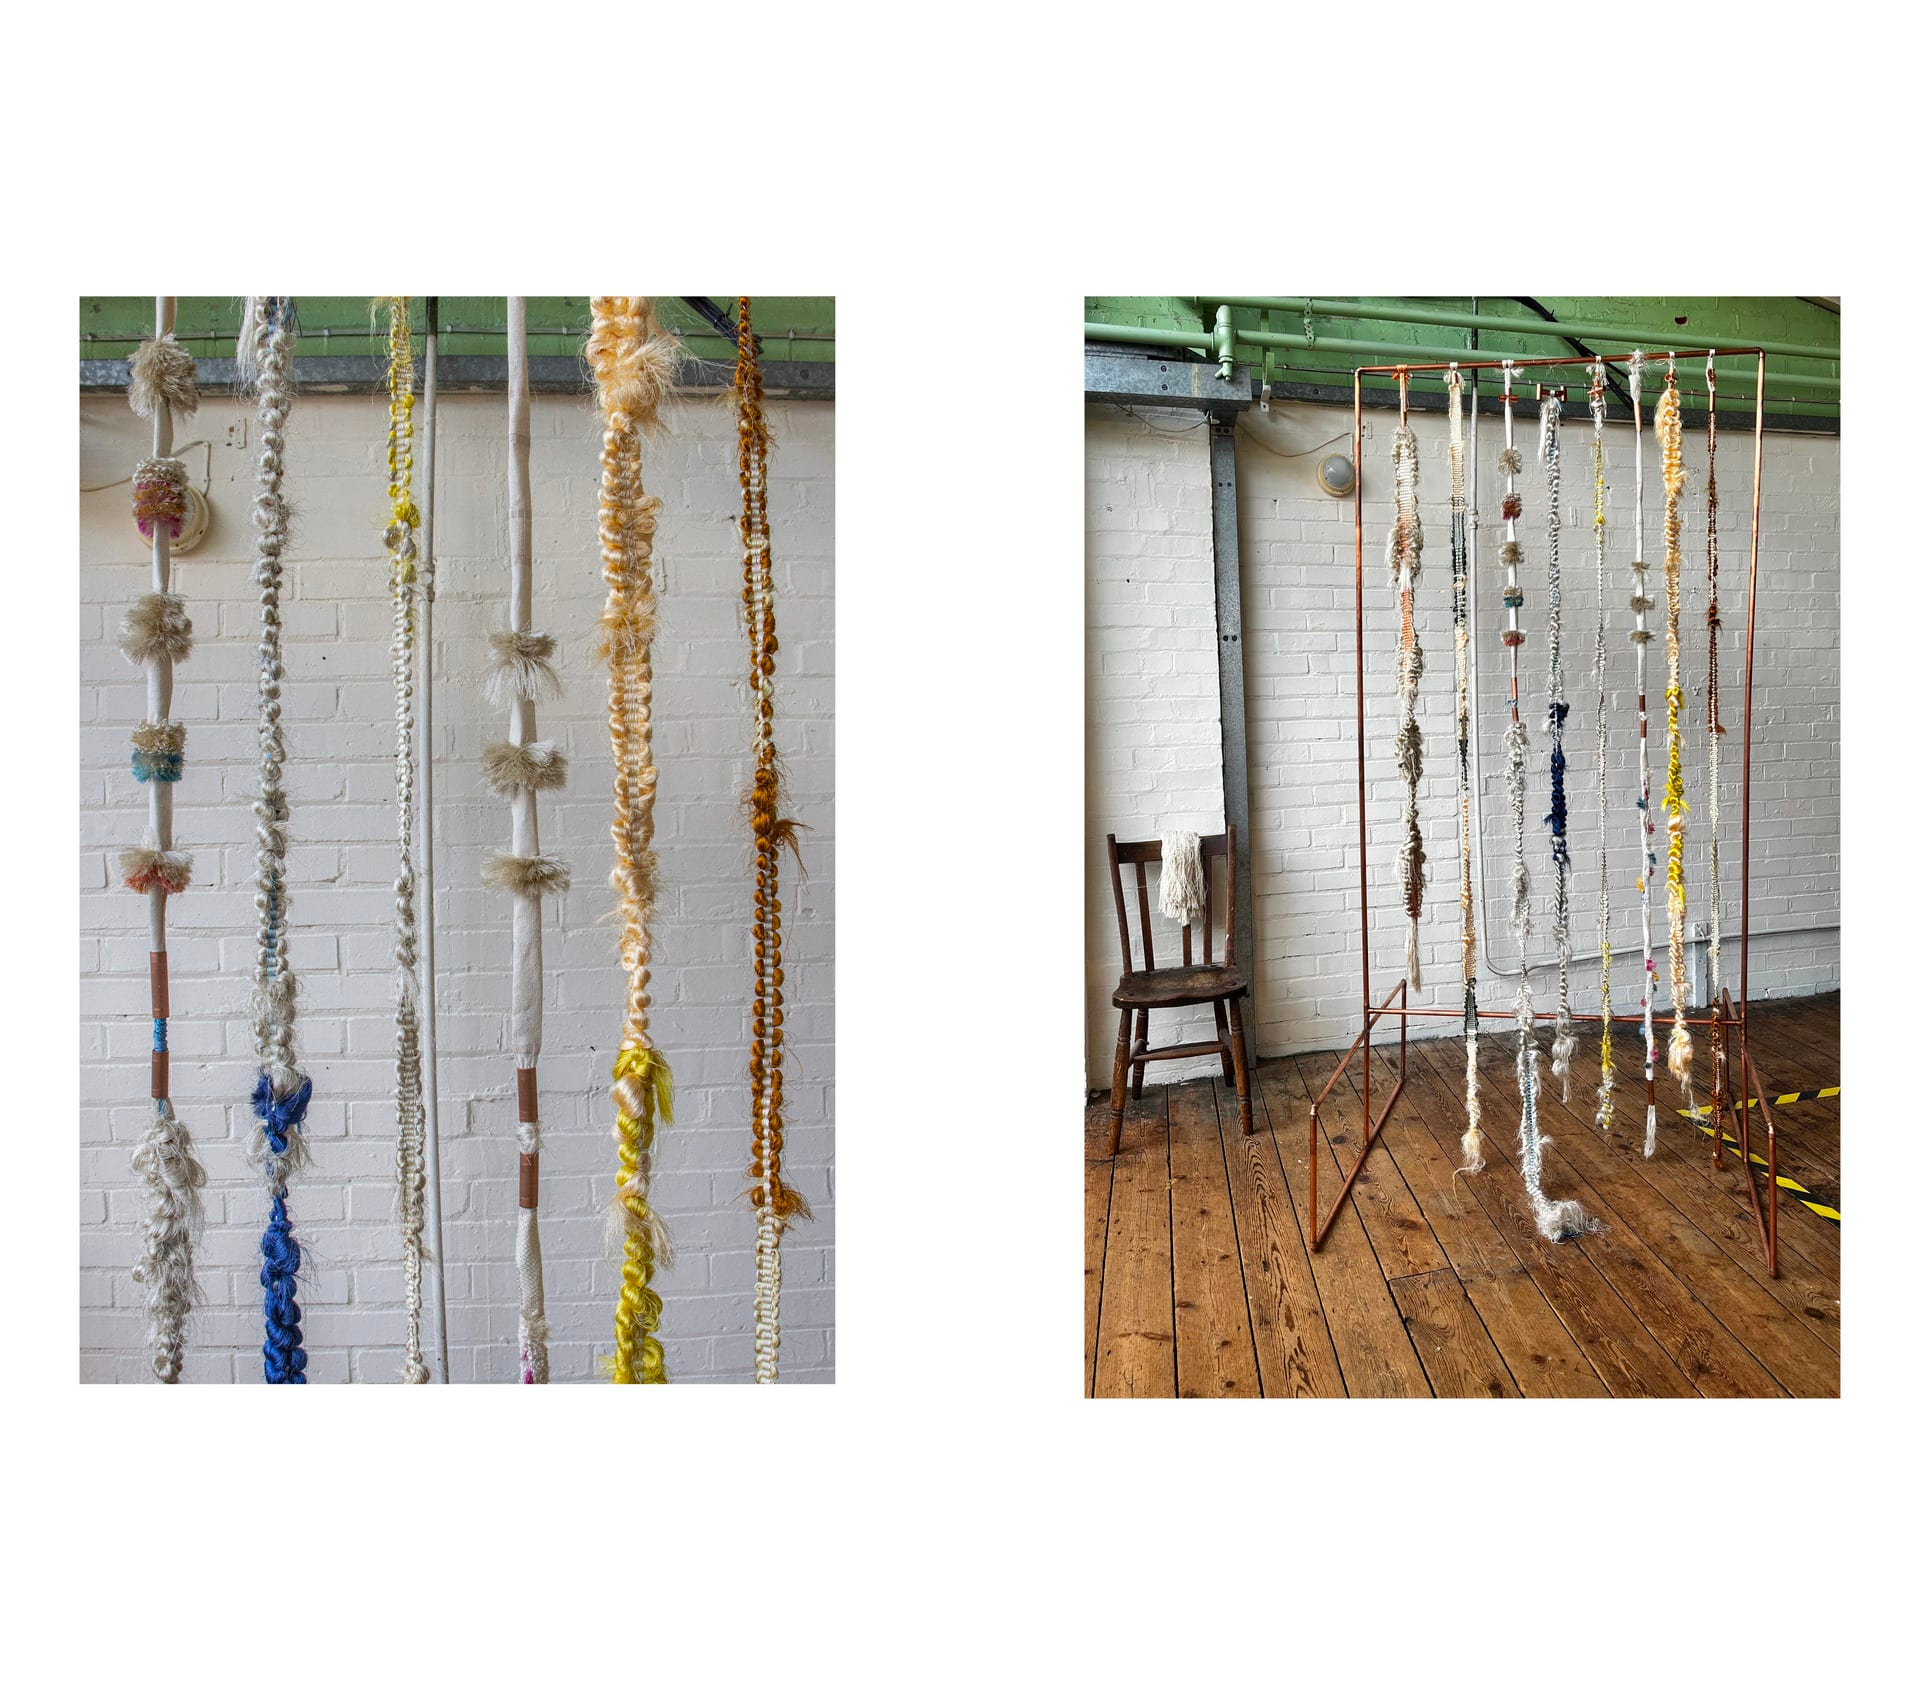 Two photographs on a white background. One on the right shows a row of long dangling objects, in different designs, hanging from a rusty metal frame, and one on the left a close-up of the objects.